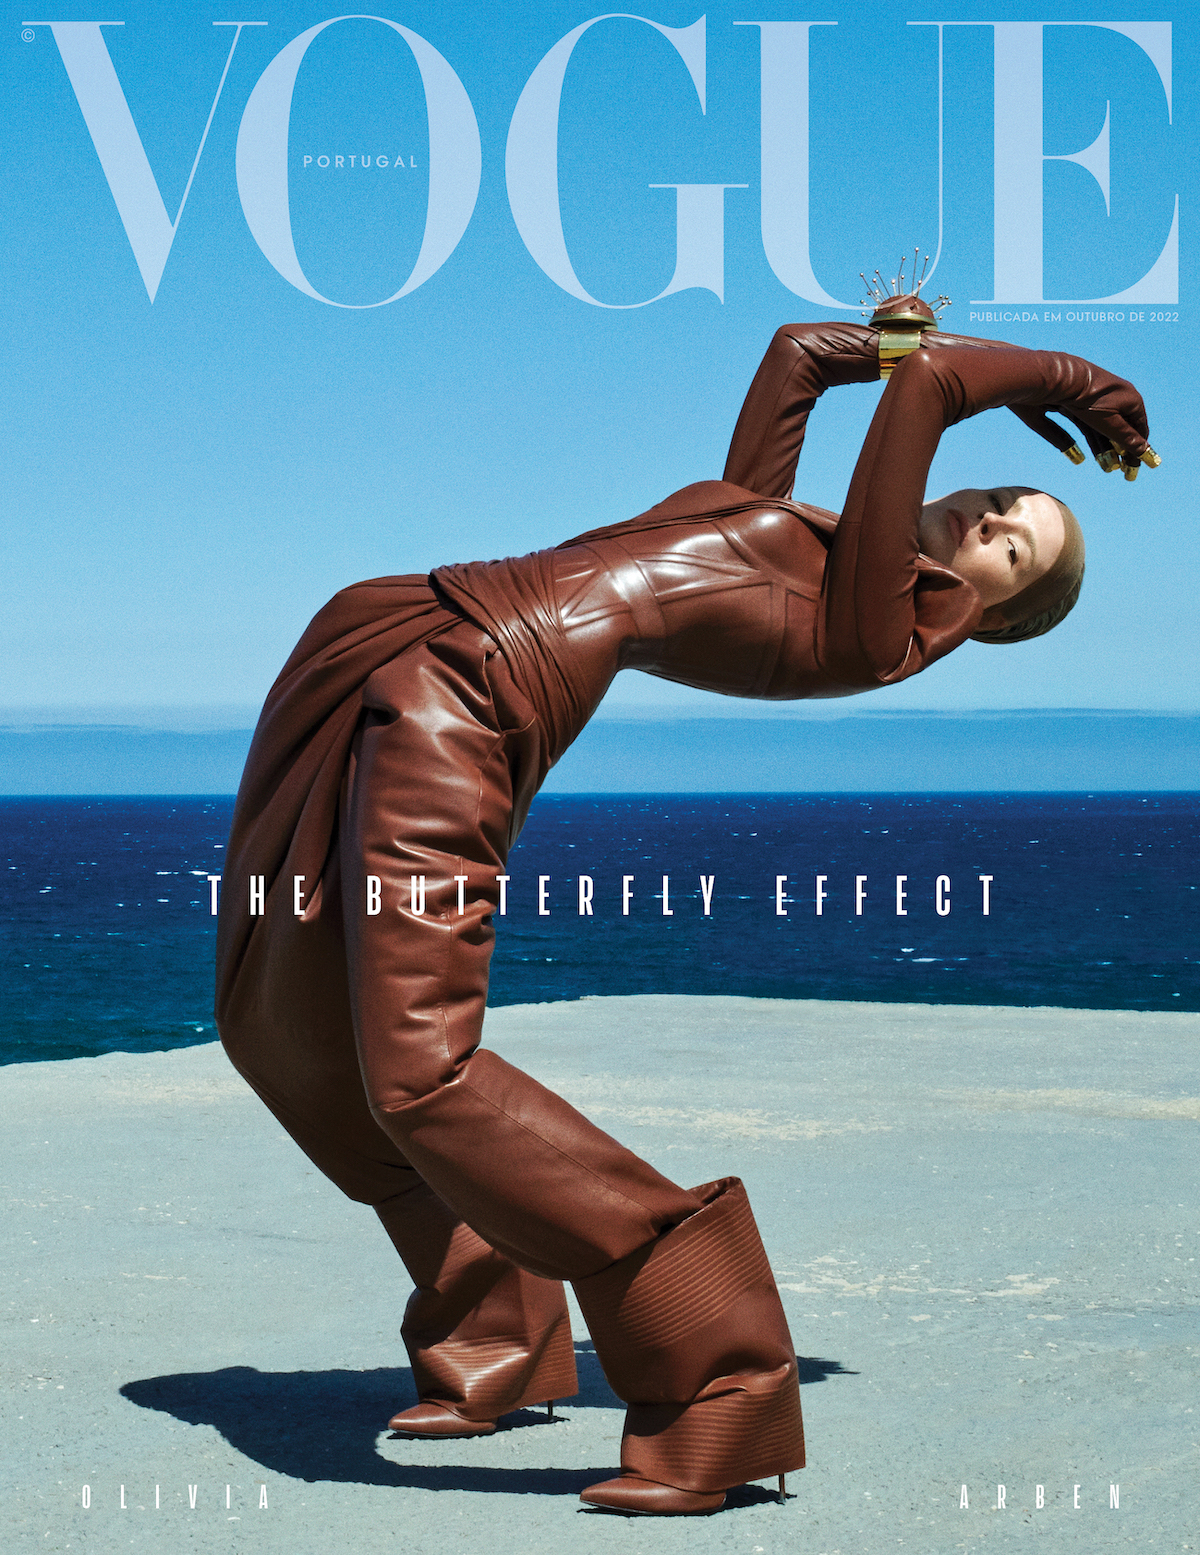 VOGUE | English Version | Editor's Letter: The Butterfly Effect